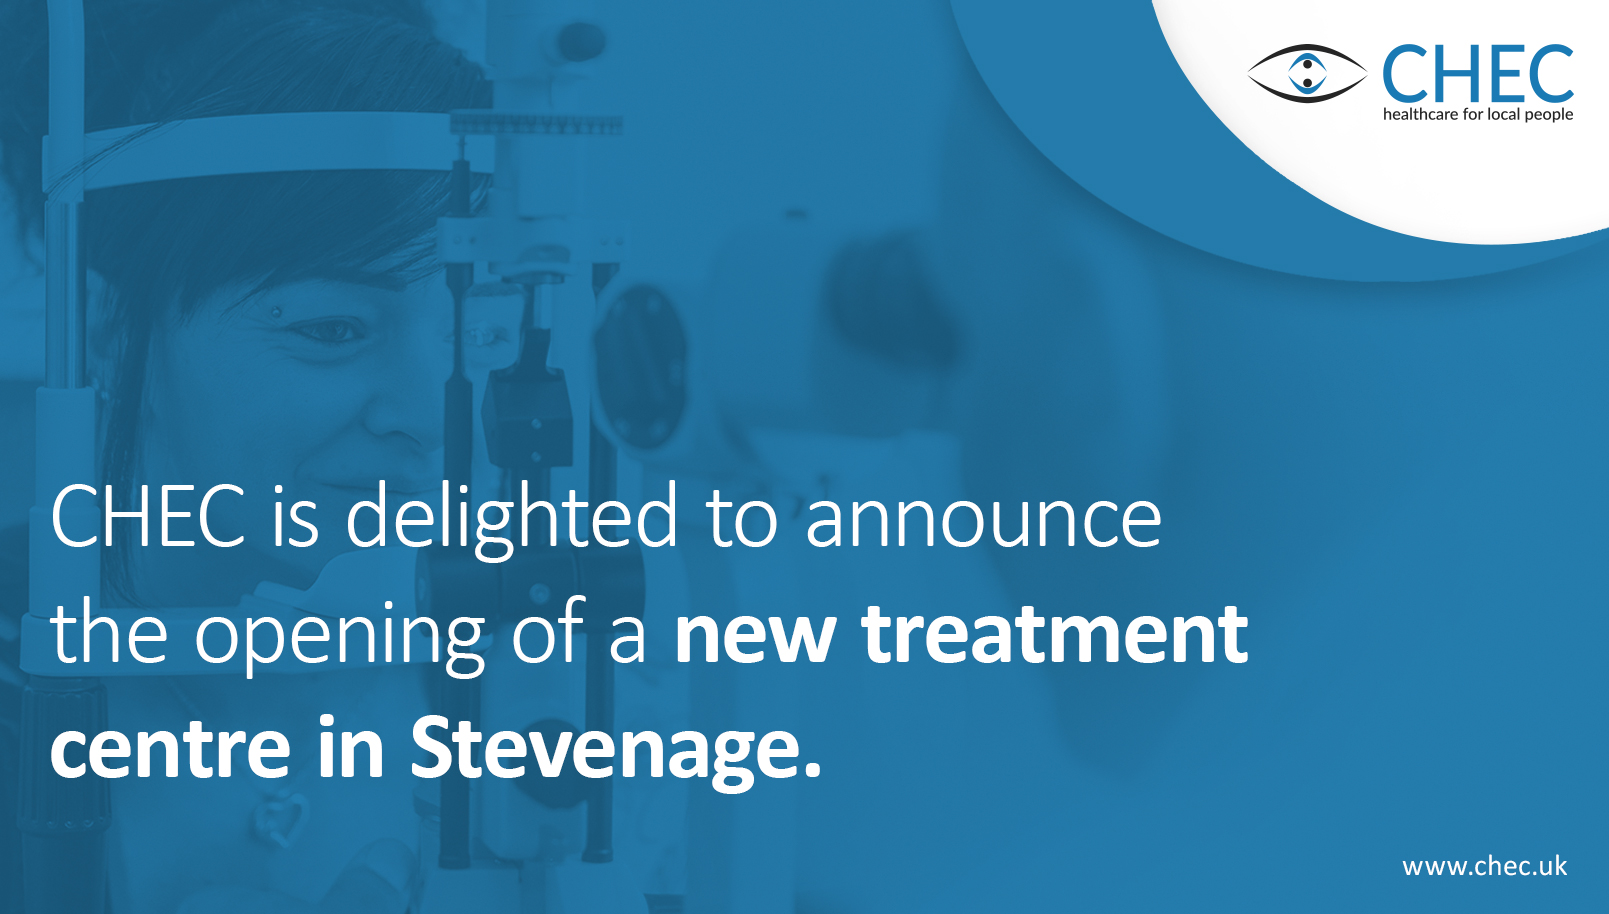 chec is delighted to announce the opening of the new treatment center in stevenage